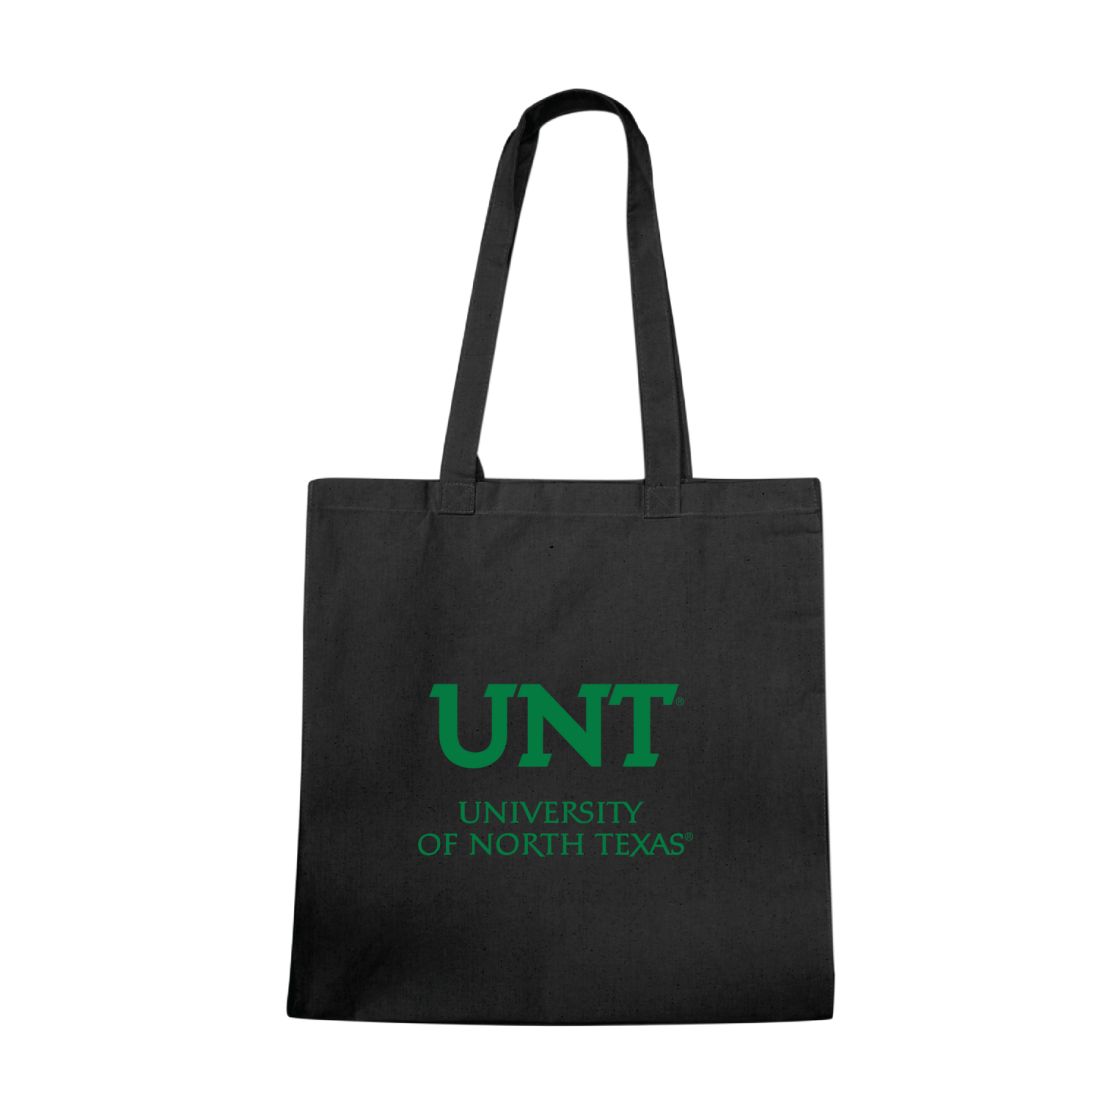 UNT University of North Texas Mean Green Institutional Tote Bag